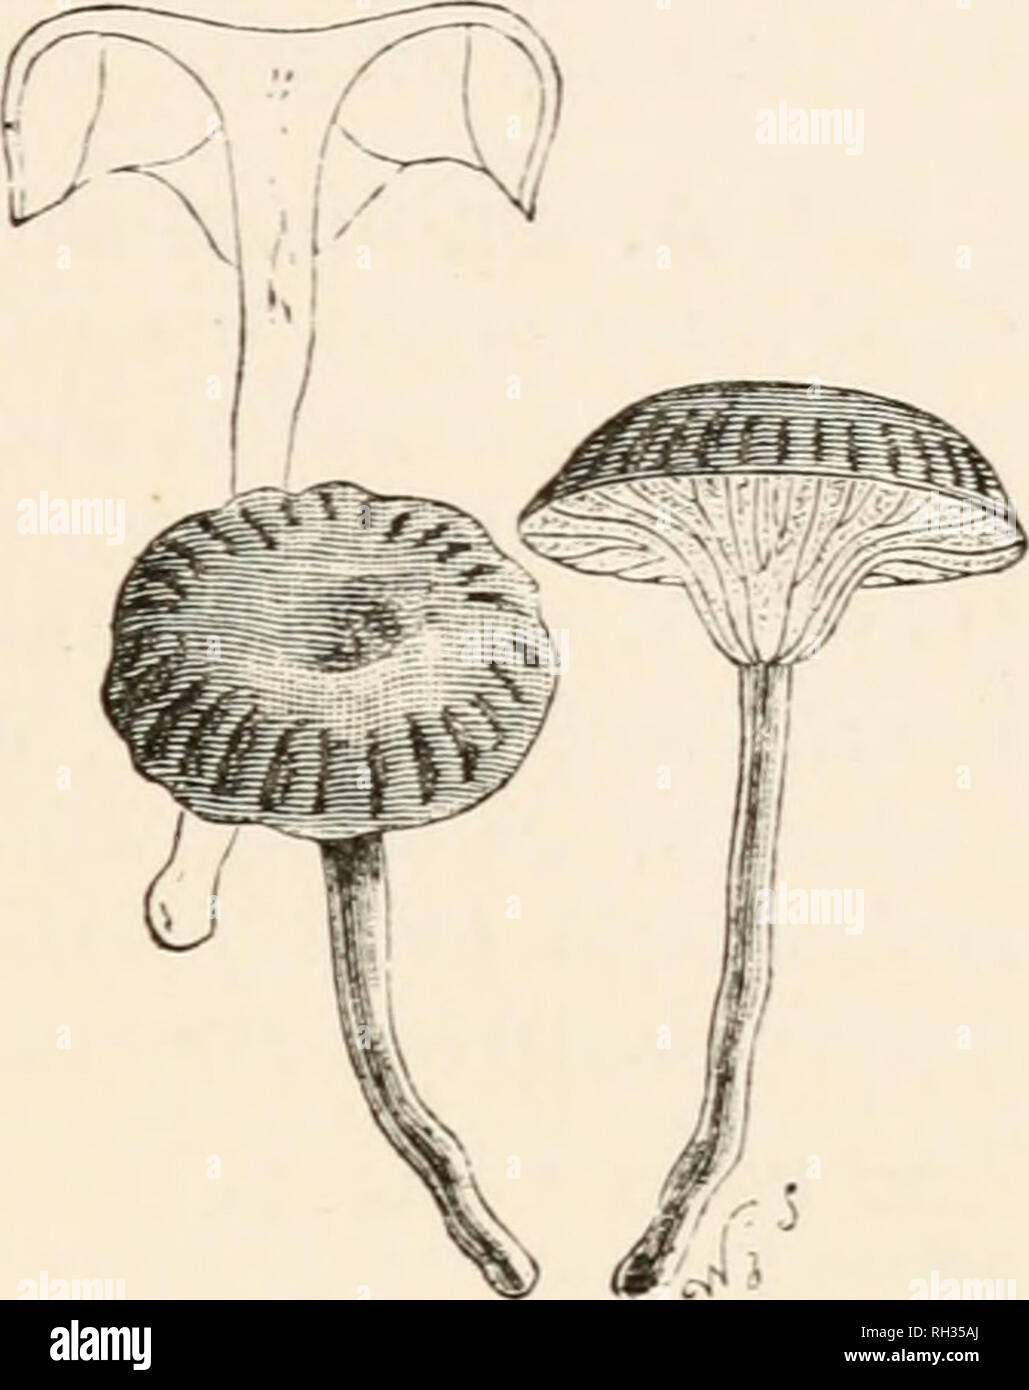 . British fungi (hymenomycetes). Basidiomycetes; Fungi -- Great Britain. LEUCOSPORI. its gills. Stature and history the same. Species of the same OmphaHa. stature also occur among the Cantharelli and Marasmii. The pileus is most frequently indeed um- hilicato-infundibuliform, but this fea- ture is in no wise constant or essential, nor is it a mark of more importance that the gills are often branched. Fr. Hym. Eur. p. 154. The species are generally well marked. They prefer a moist situation, and stand changes of temperature well. The larger ones are peculiar to moun- tainous regions. They are i Stock Photo